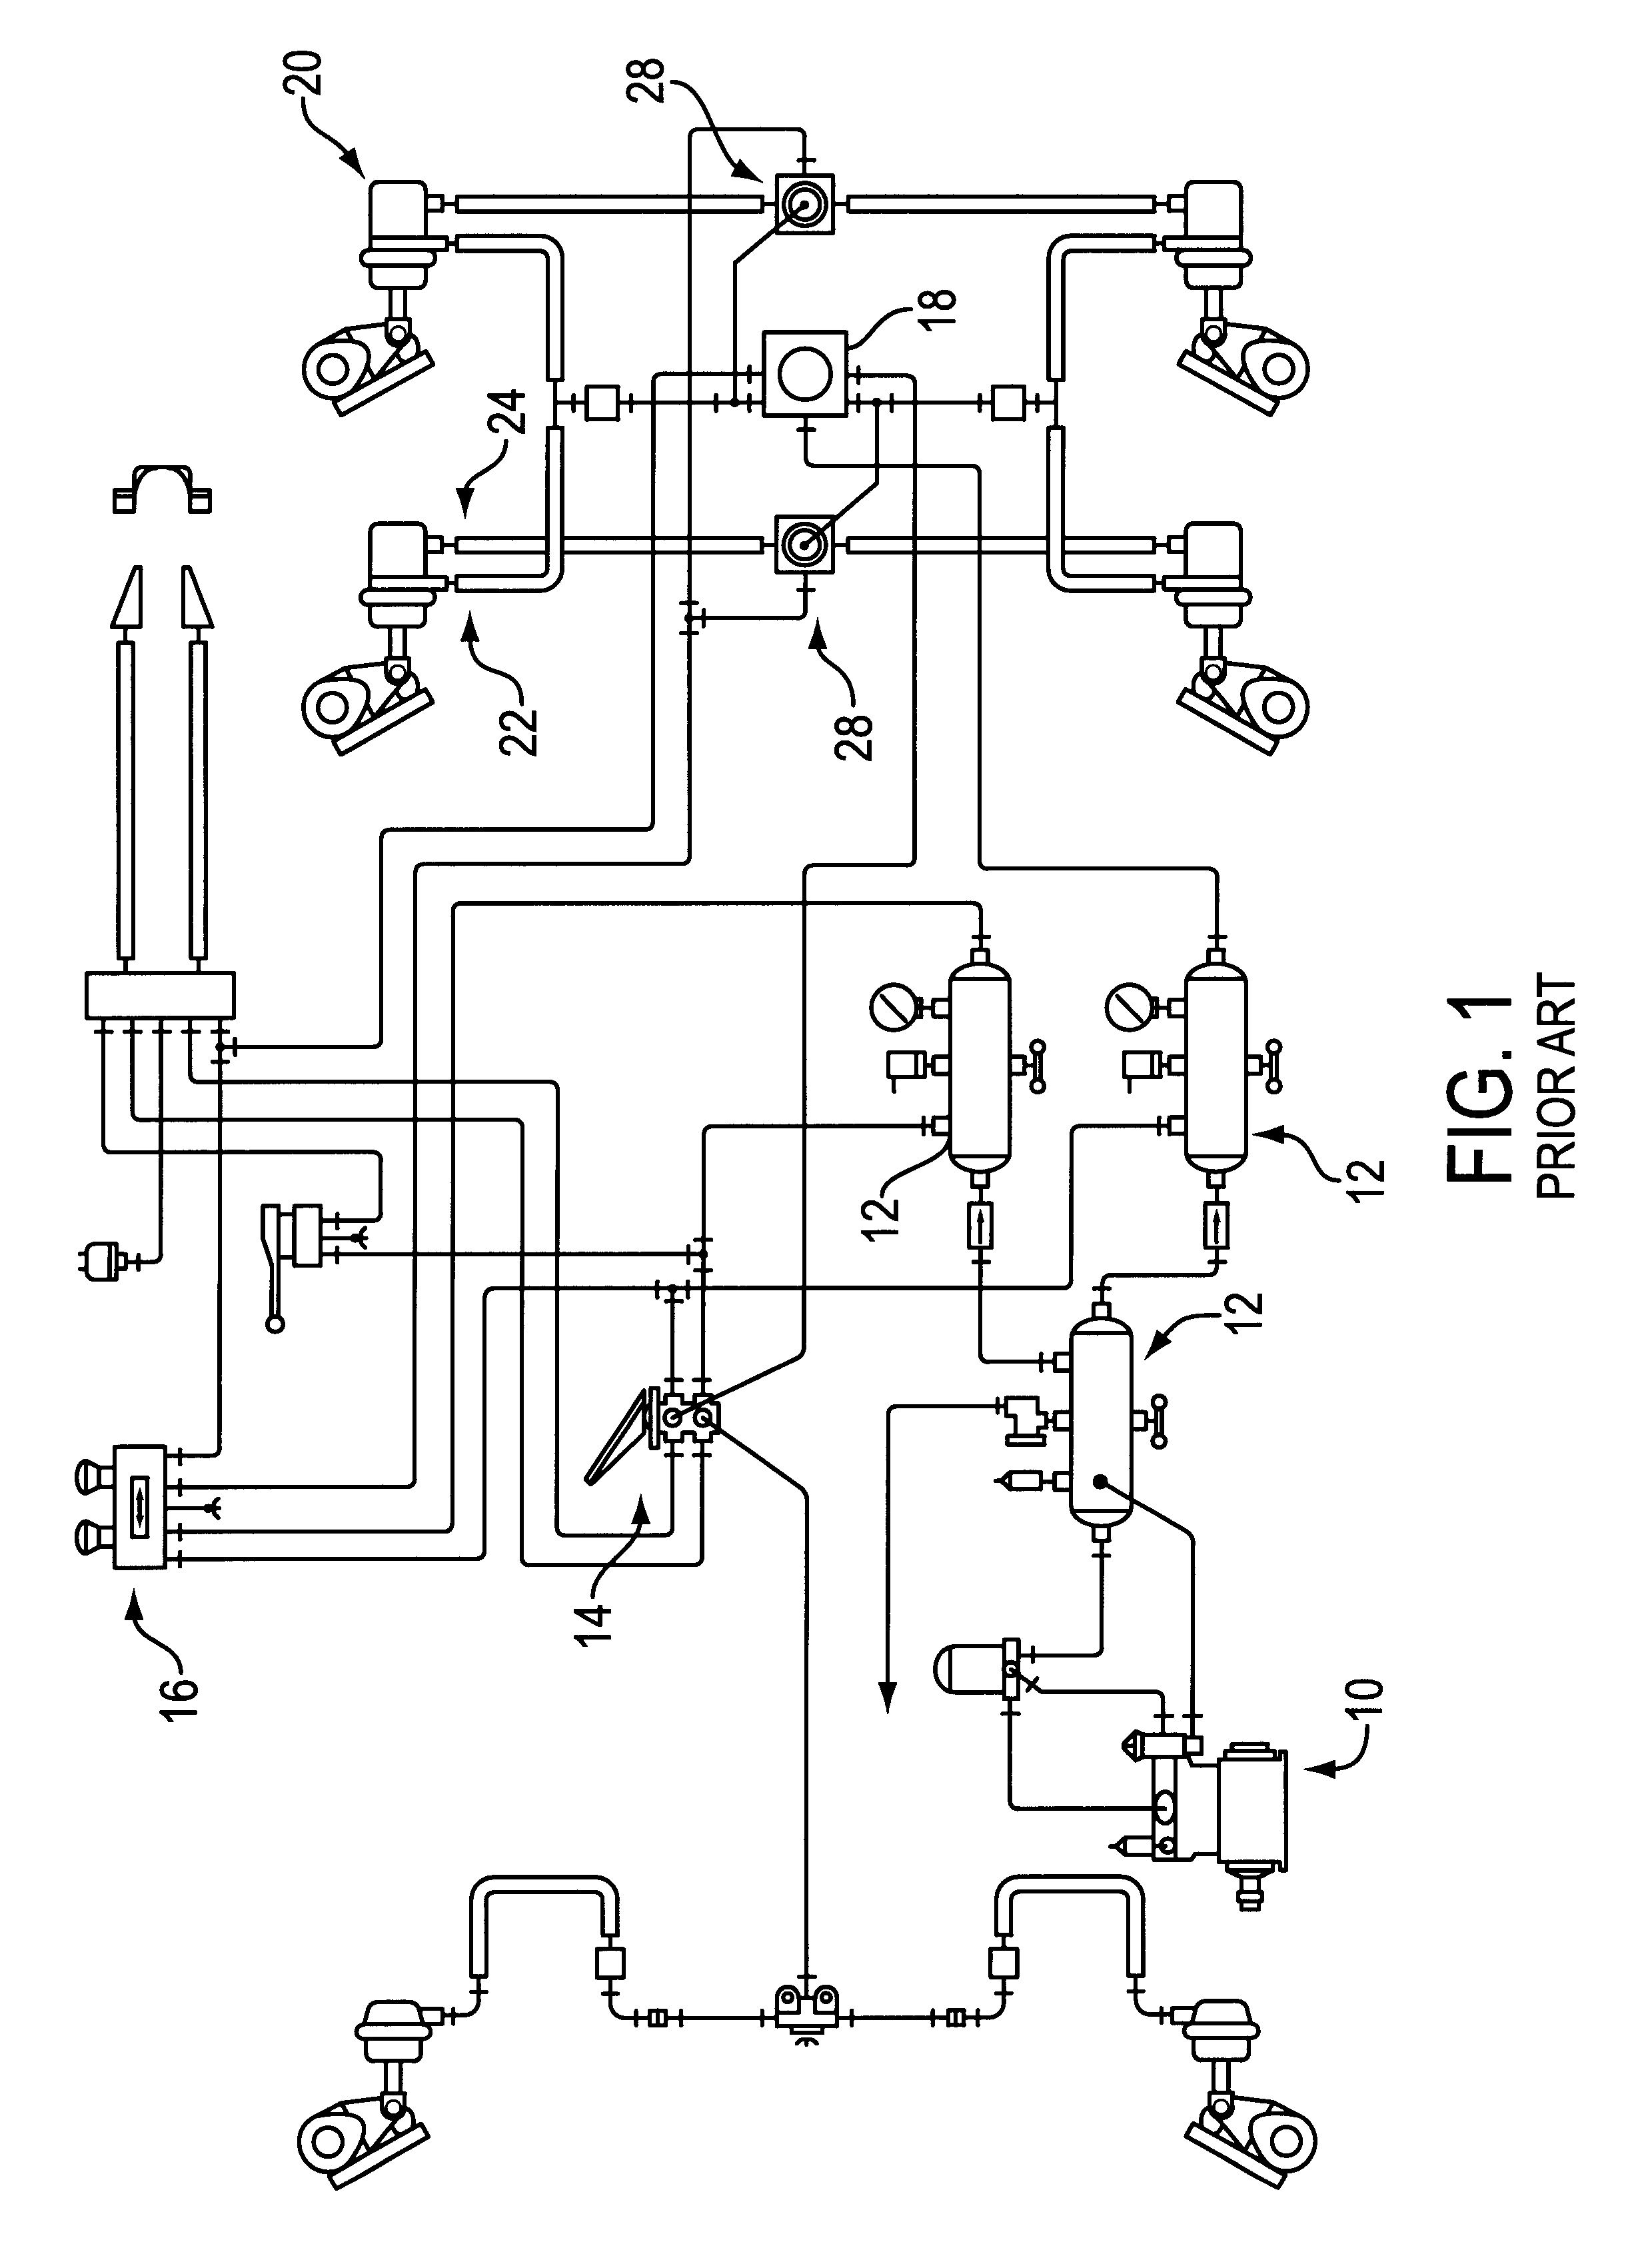 Spring brake actuator with integral biased double check valve for anti-compounding and roll-back protection